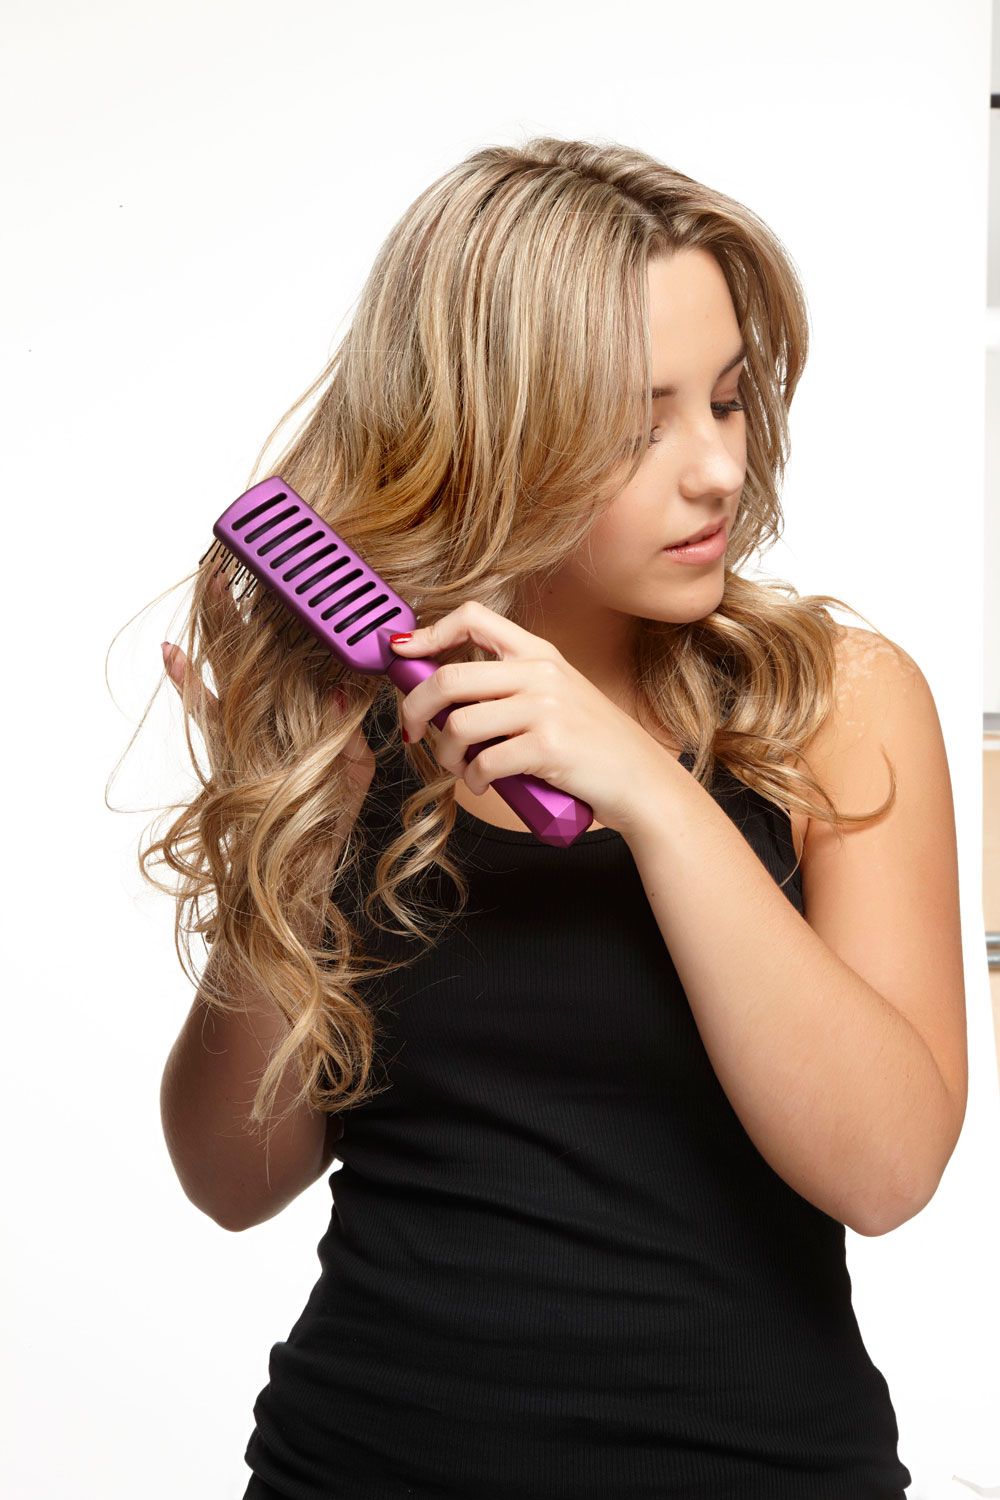 Brushing Hair How To Benefits Frequency and More